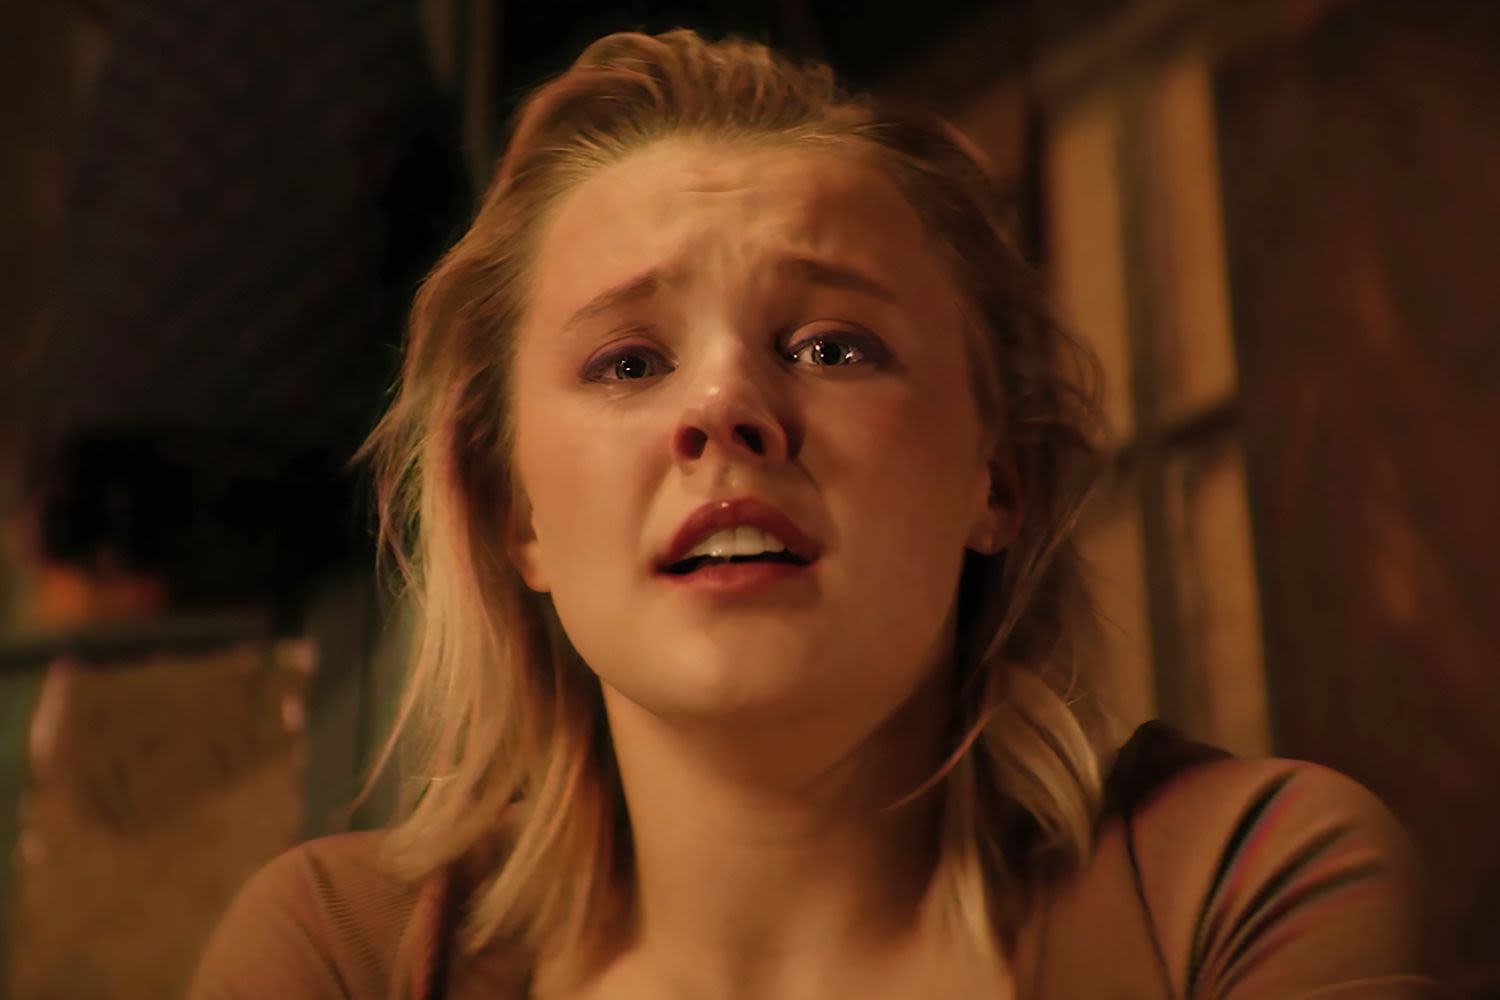 JoJo Siwa Shows Off Her Acting Chops in Dramatic Clip from '#AMFAD: All My Friends Are Dead' (Exclusive)